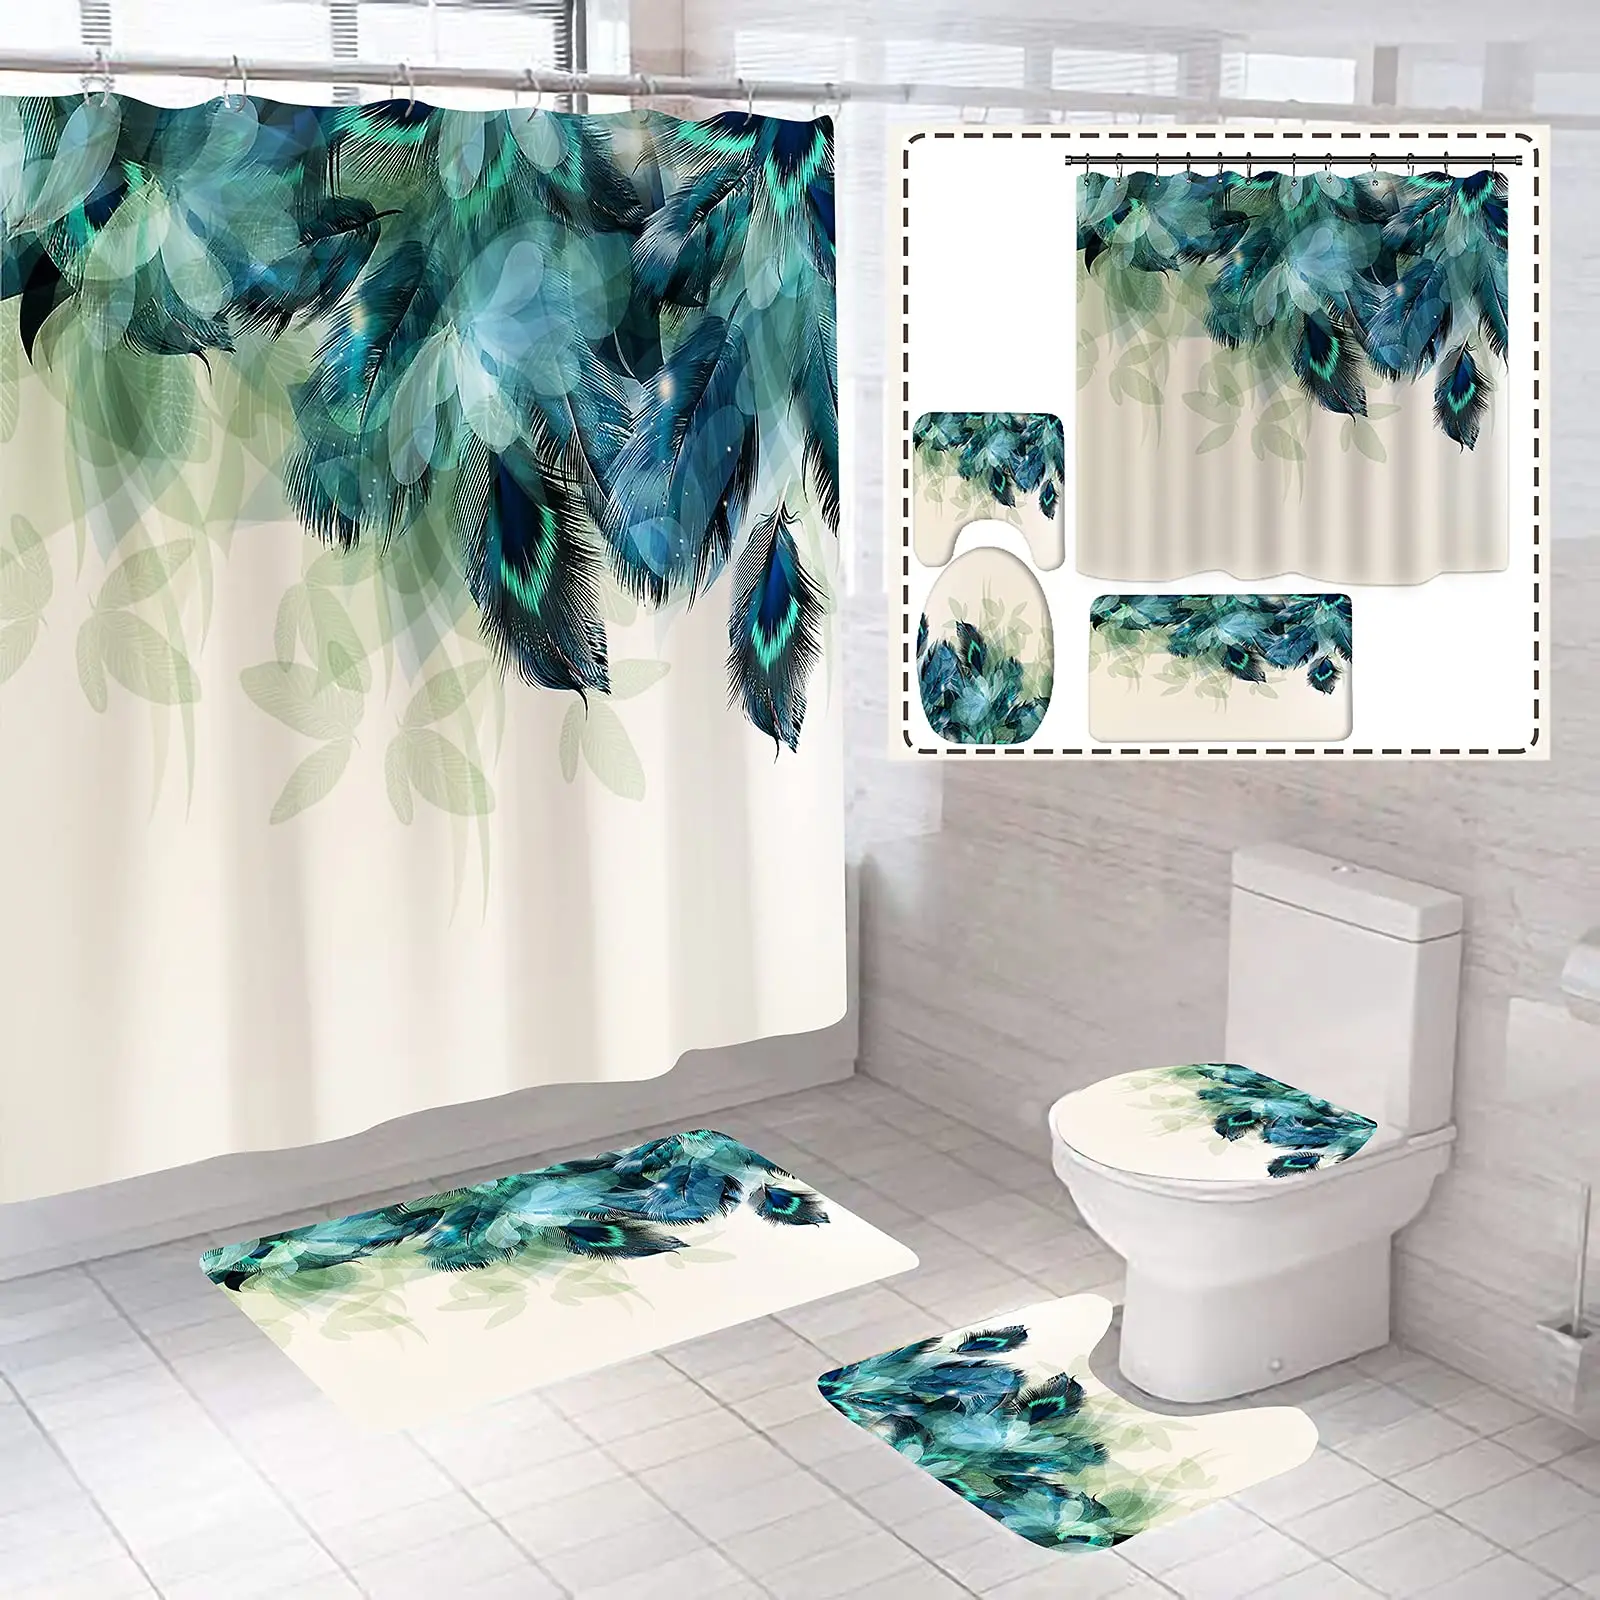 

Watercolor Peacock Feather Shower Curtain Set with Rugs Toilet Lid Cover Carpet Bath Mat Bathroom Shower Curtains Set Home Decor